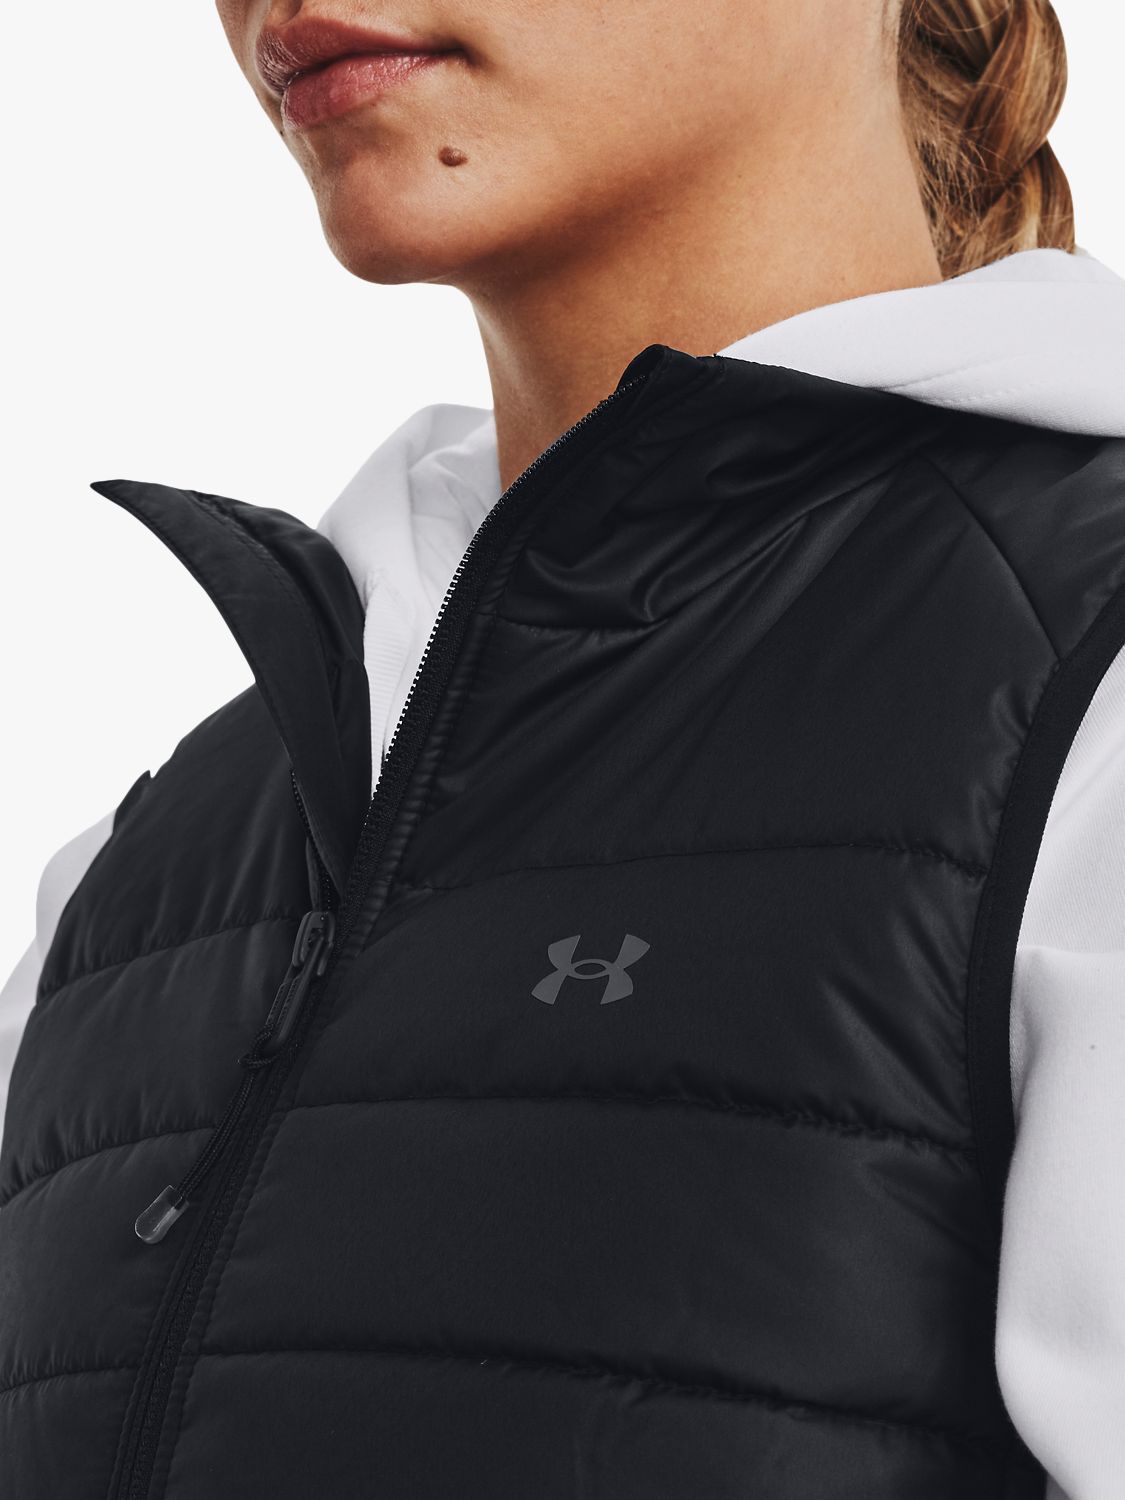 Under Armour Storm Run Trousers at John Lewis & Partners